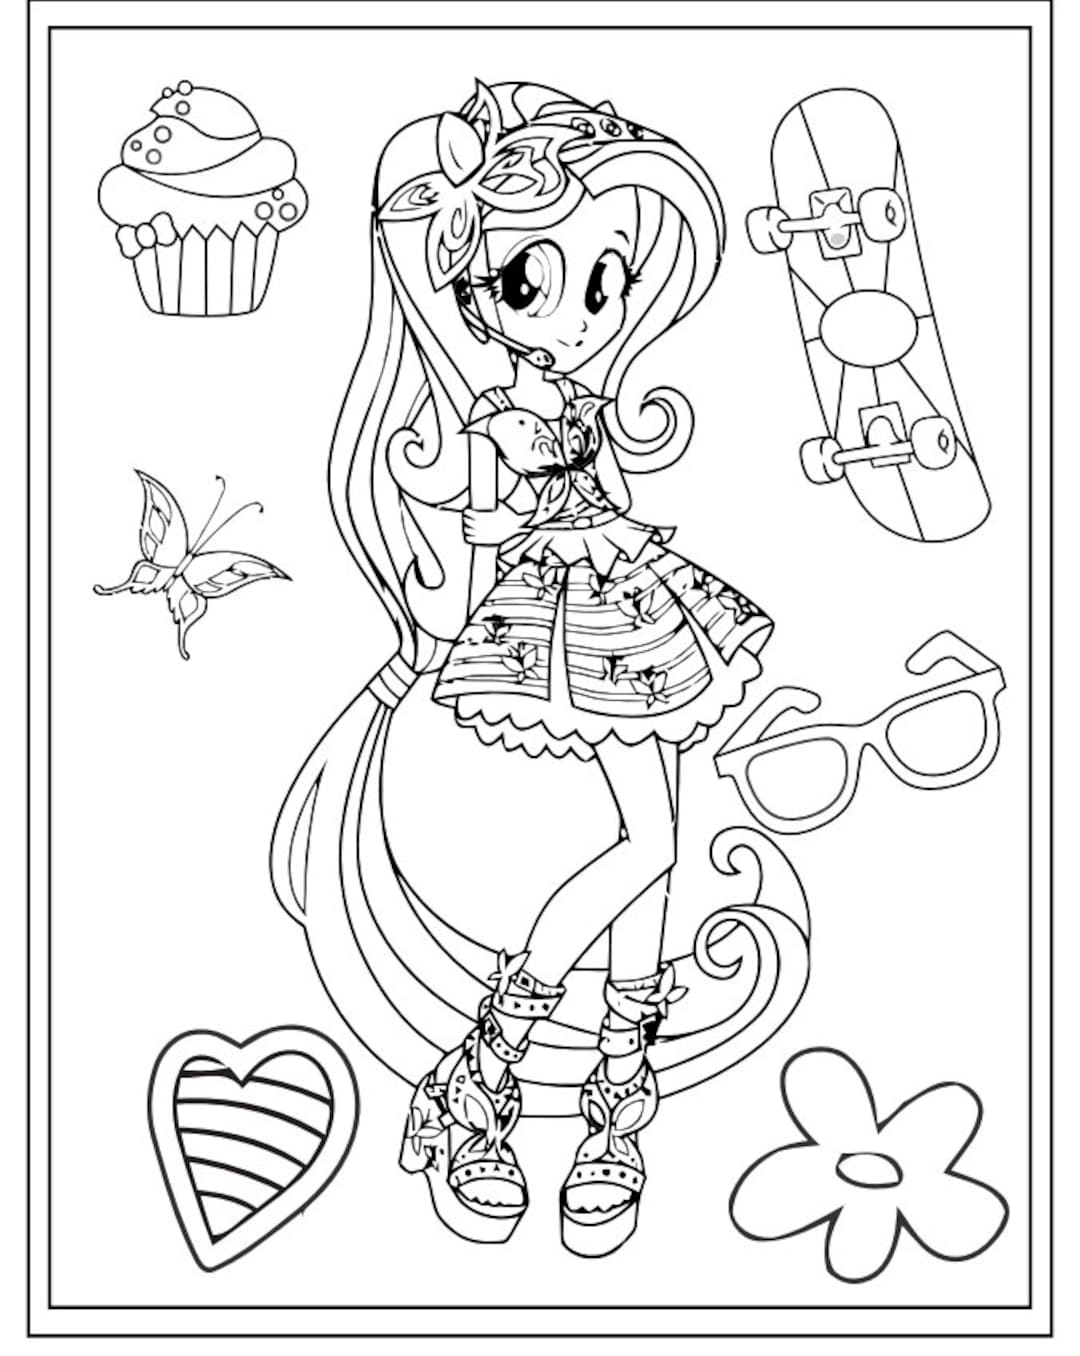 Fashion Coloring Book for Girls Fun Fashion and Fresh Styles 29 Pages ...